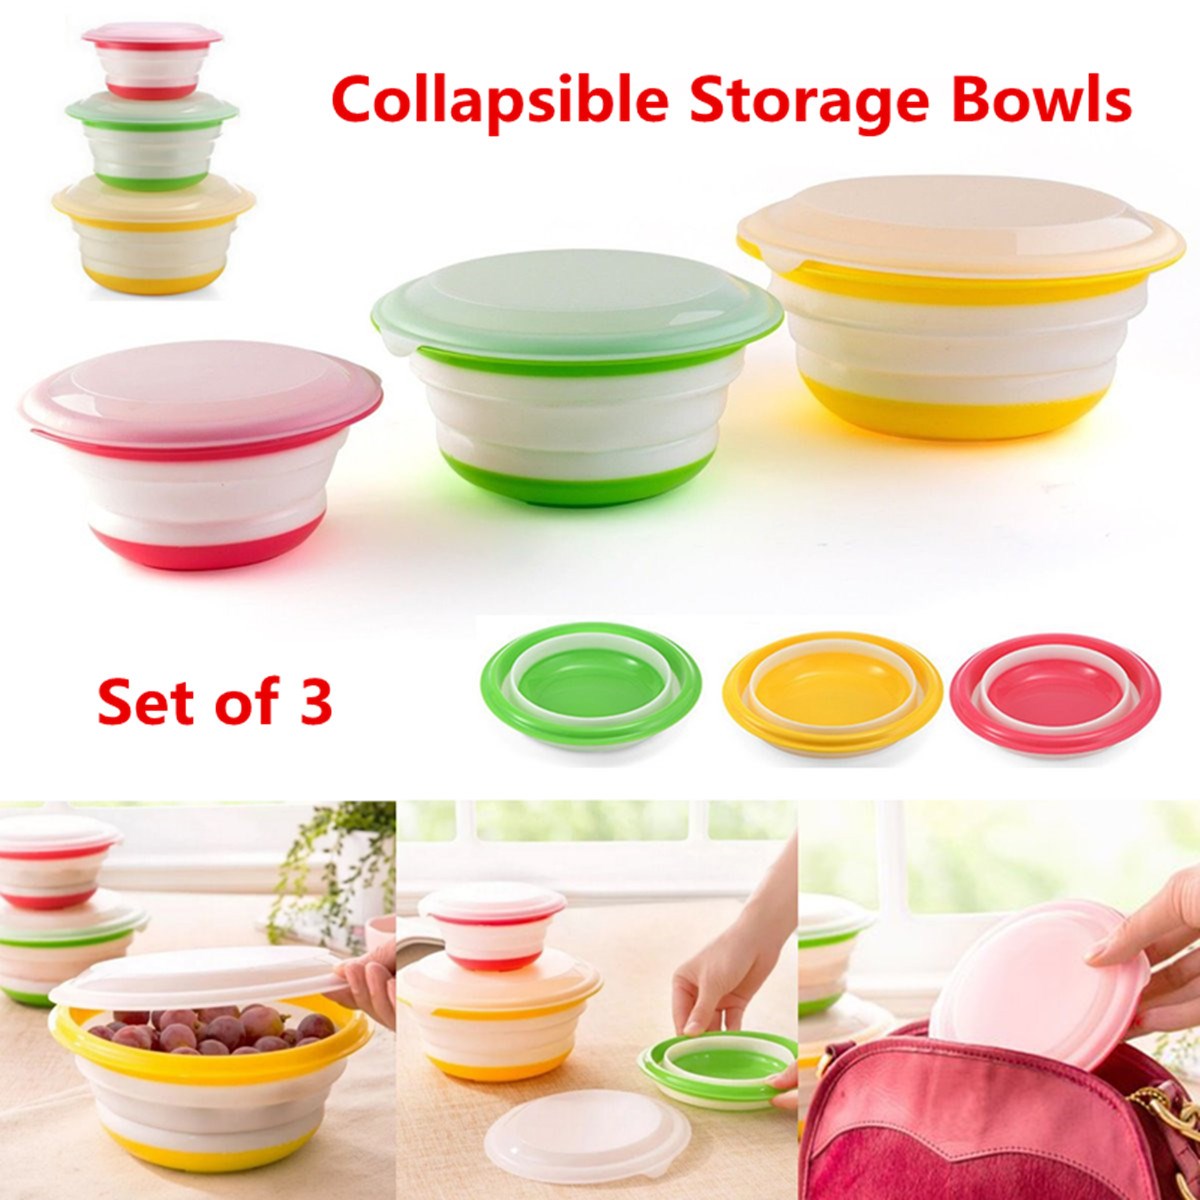 https://meal-prep-gear-shop.myshopify.com/cdn/shop/products/3Pcs-Set-Silicone-Collapsible-Storage-Bowls-Dish-Lids-Stackable-Food-Meal-Prep-Containers-Home-Office-Portable_ee28a751-23e8-415a-bf4d-3909098e7490.jpg?v=1513131419